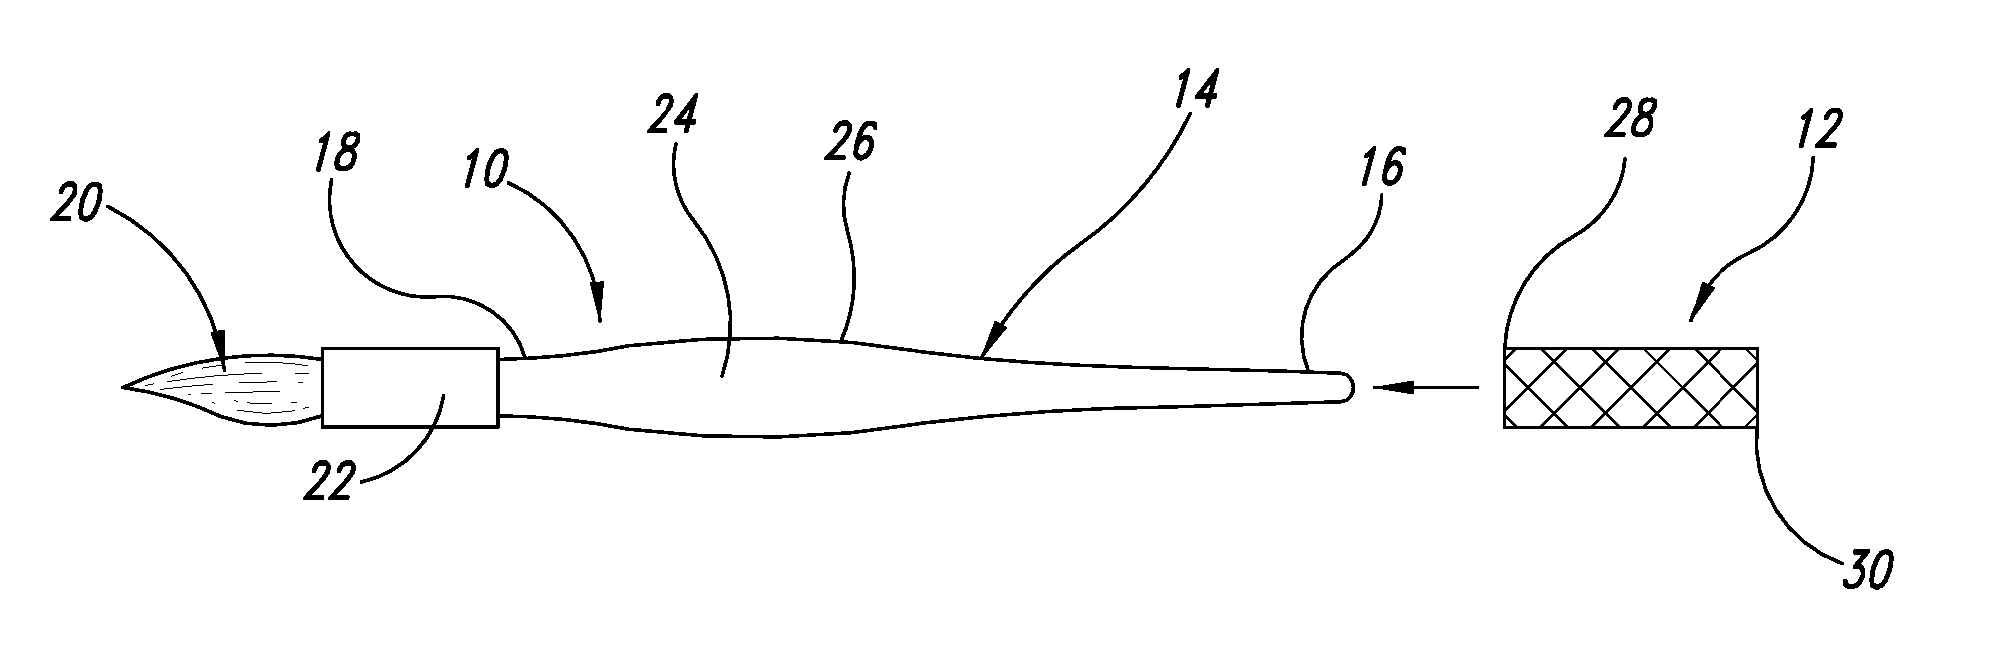 System and method for preserving paintbrush bristles